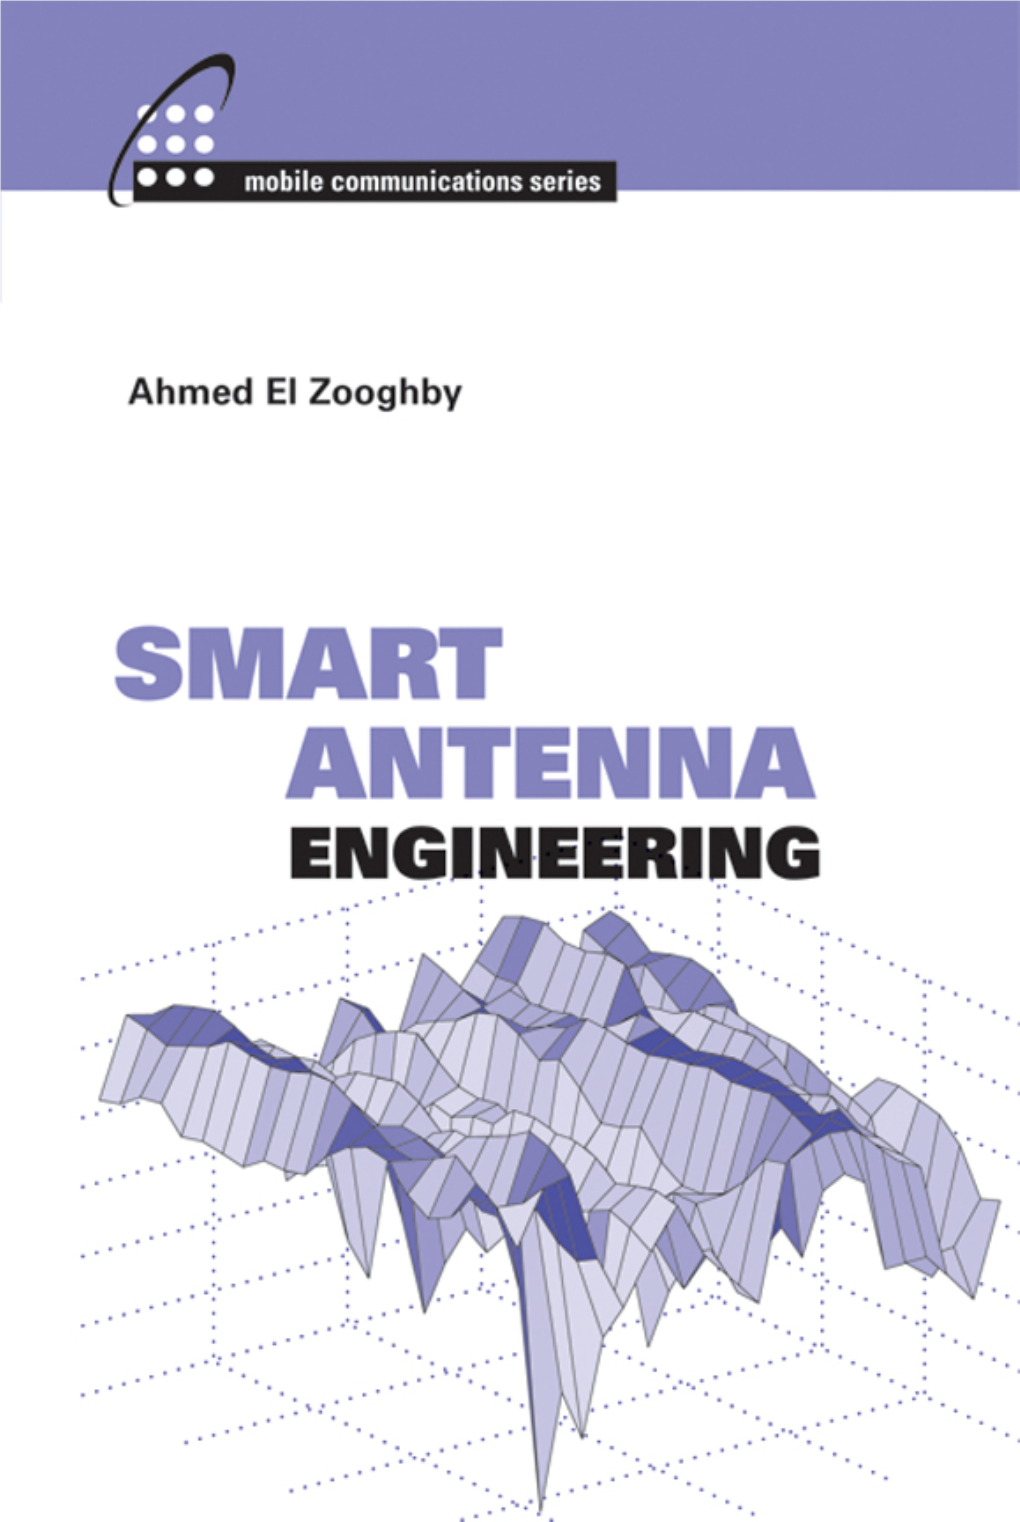 Smart Antenna Engineering for a Complete Listing of Recent Titles in the Artech House Mobile Communications Series,Turn to the Back of This Book